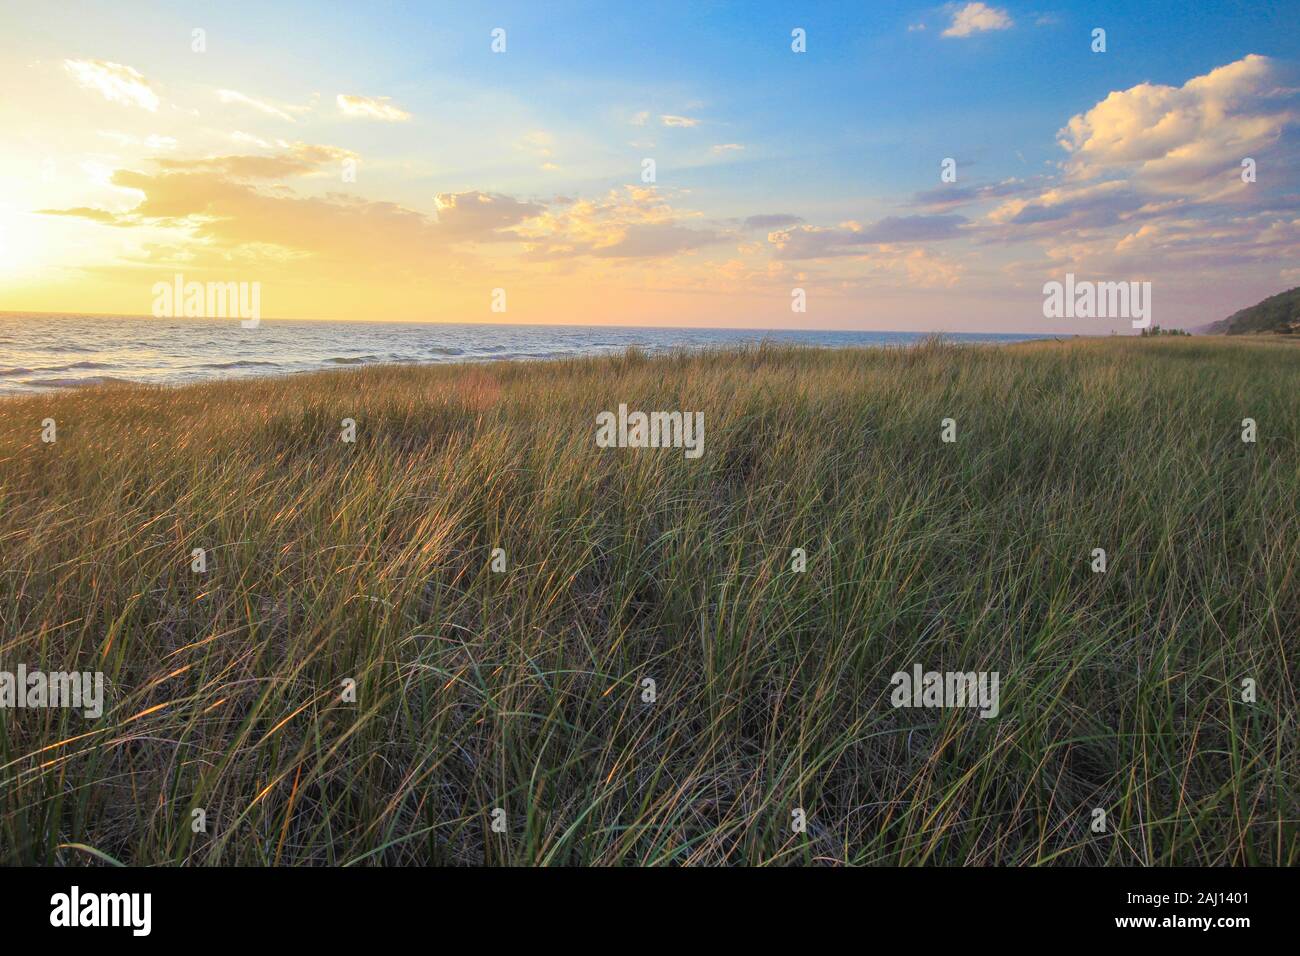 Summer Sunset Beach Background. Beautiful summer sunset on the Lake Michigan coast with dune grass in the foreground at Hoffmaster State Park. Stock Photo